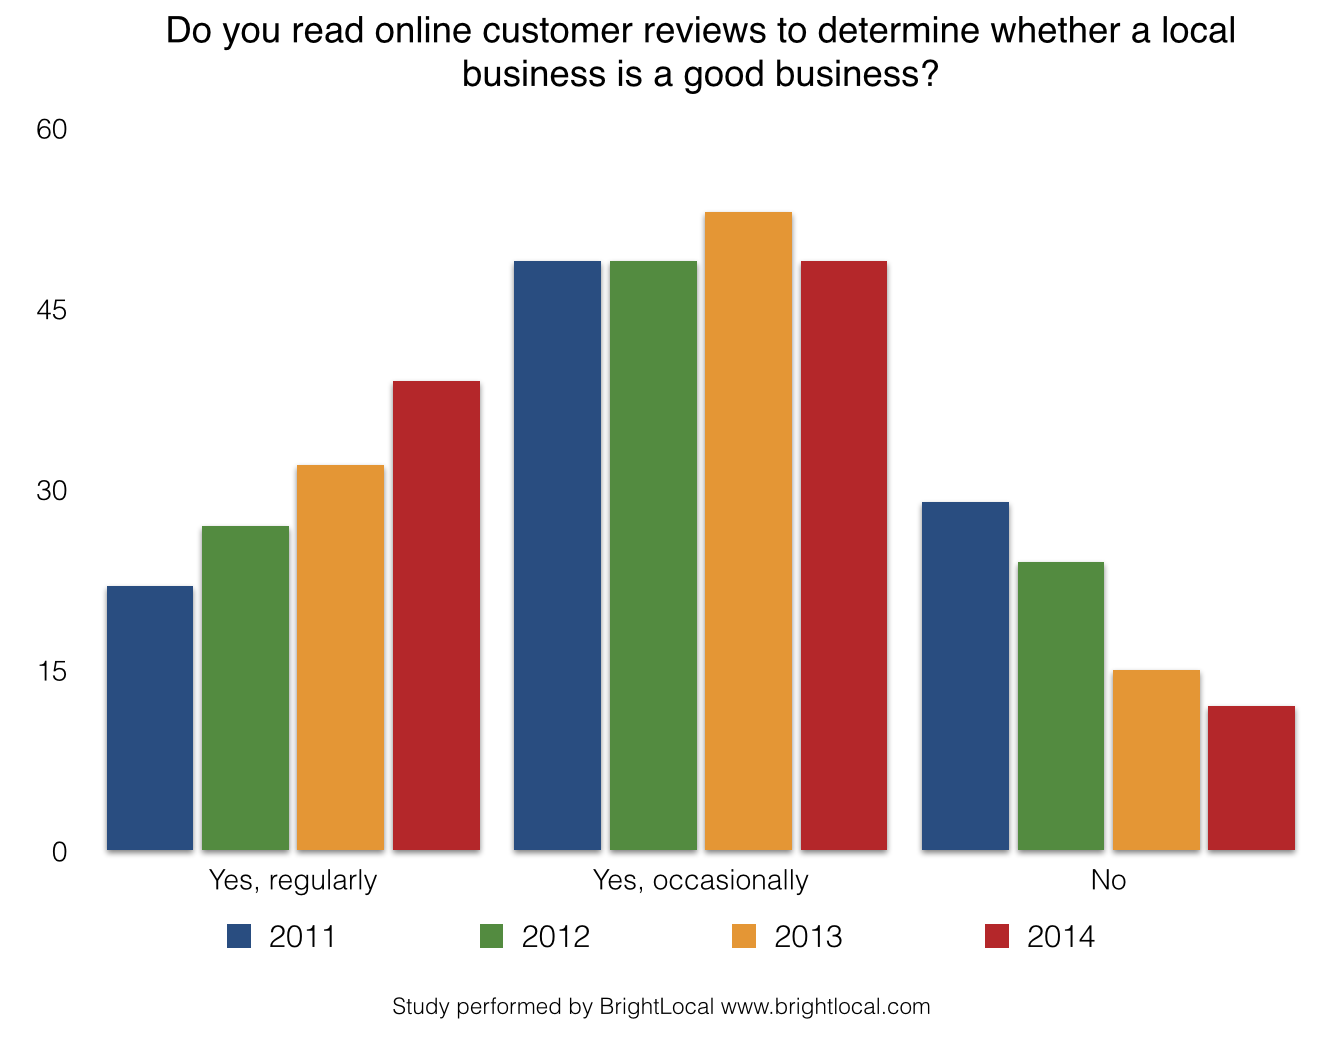 Do you read online reviews to decide buying from a local business